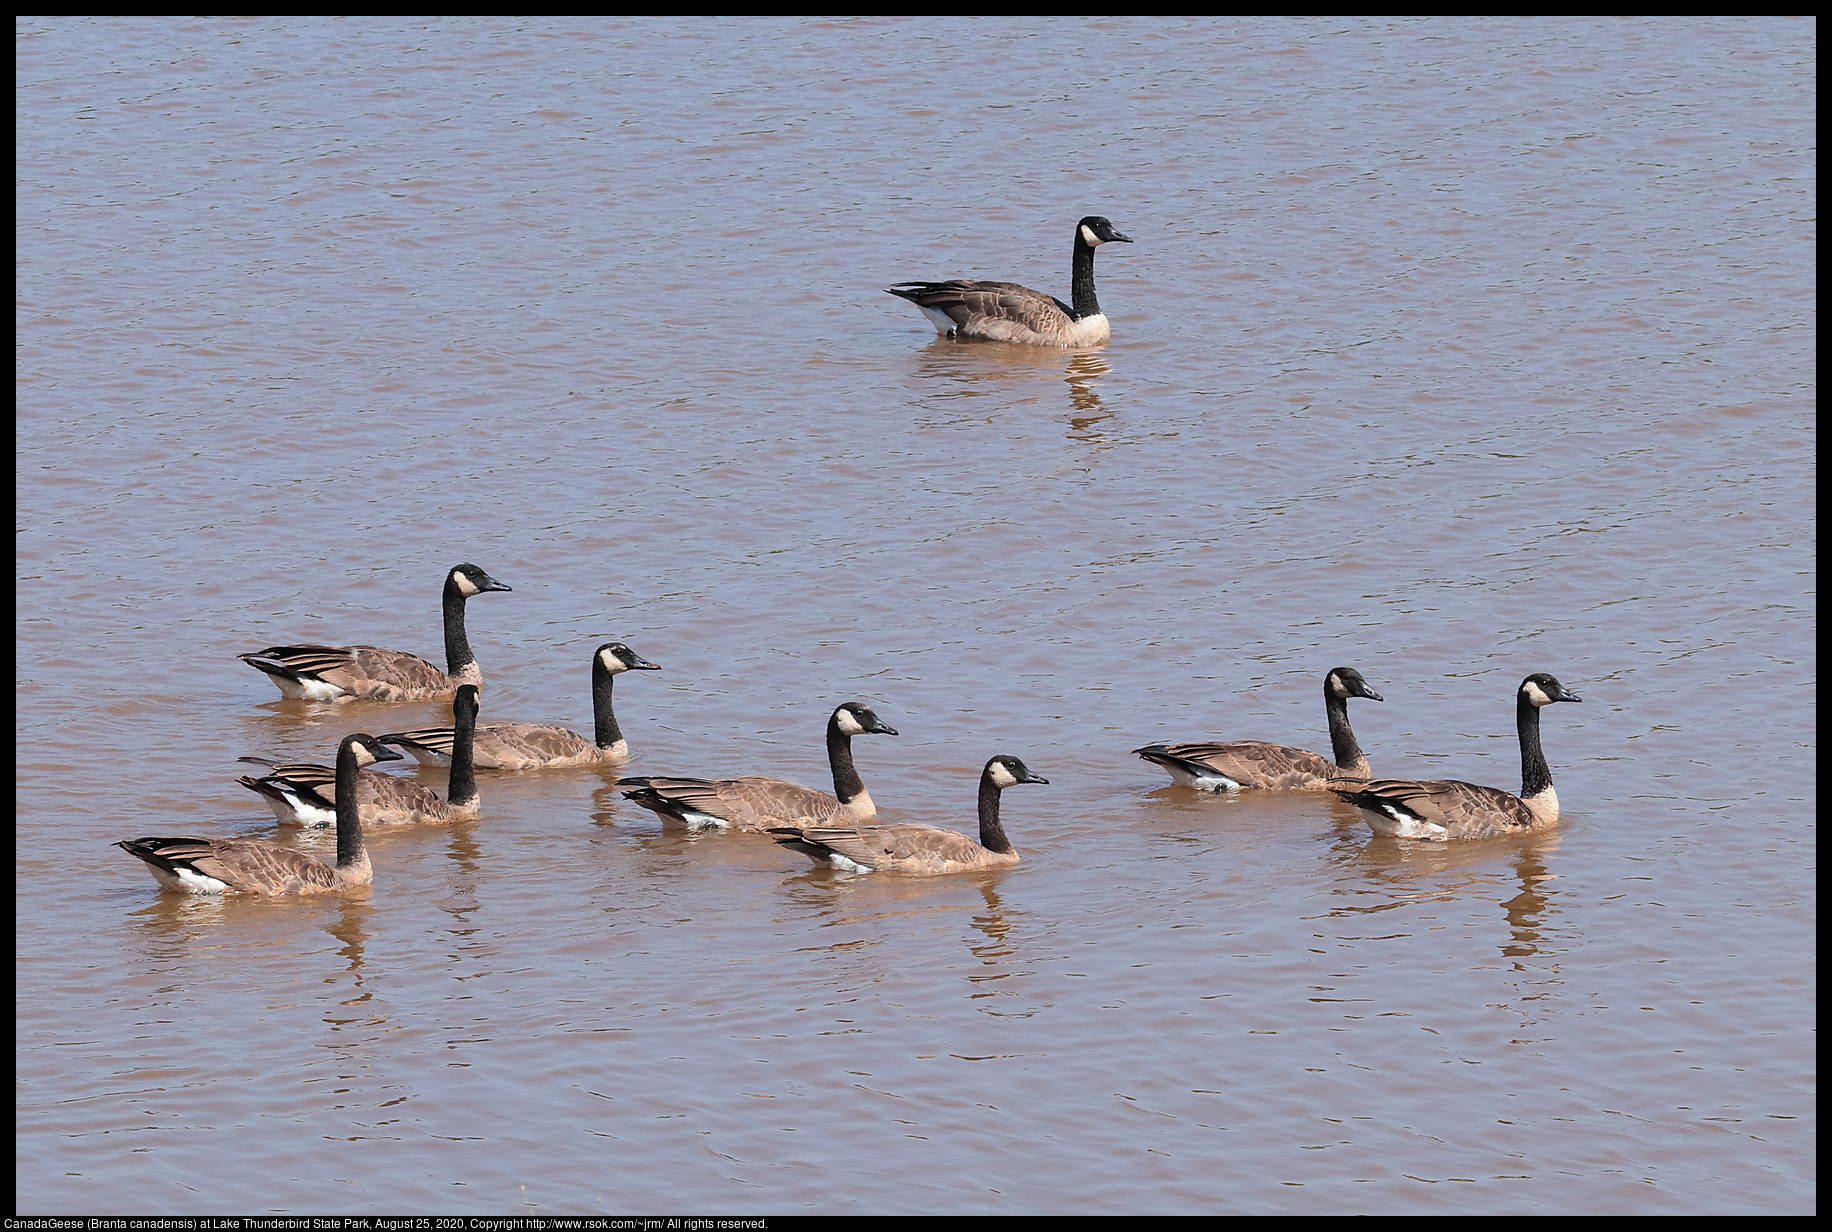 Canada Geese (Branta canadensis) at Lake Thunderbird State Park, August 25, 2020